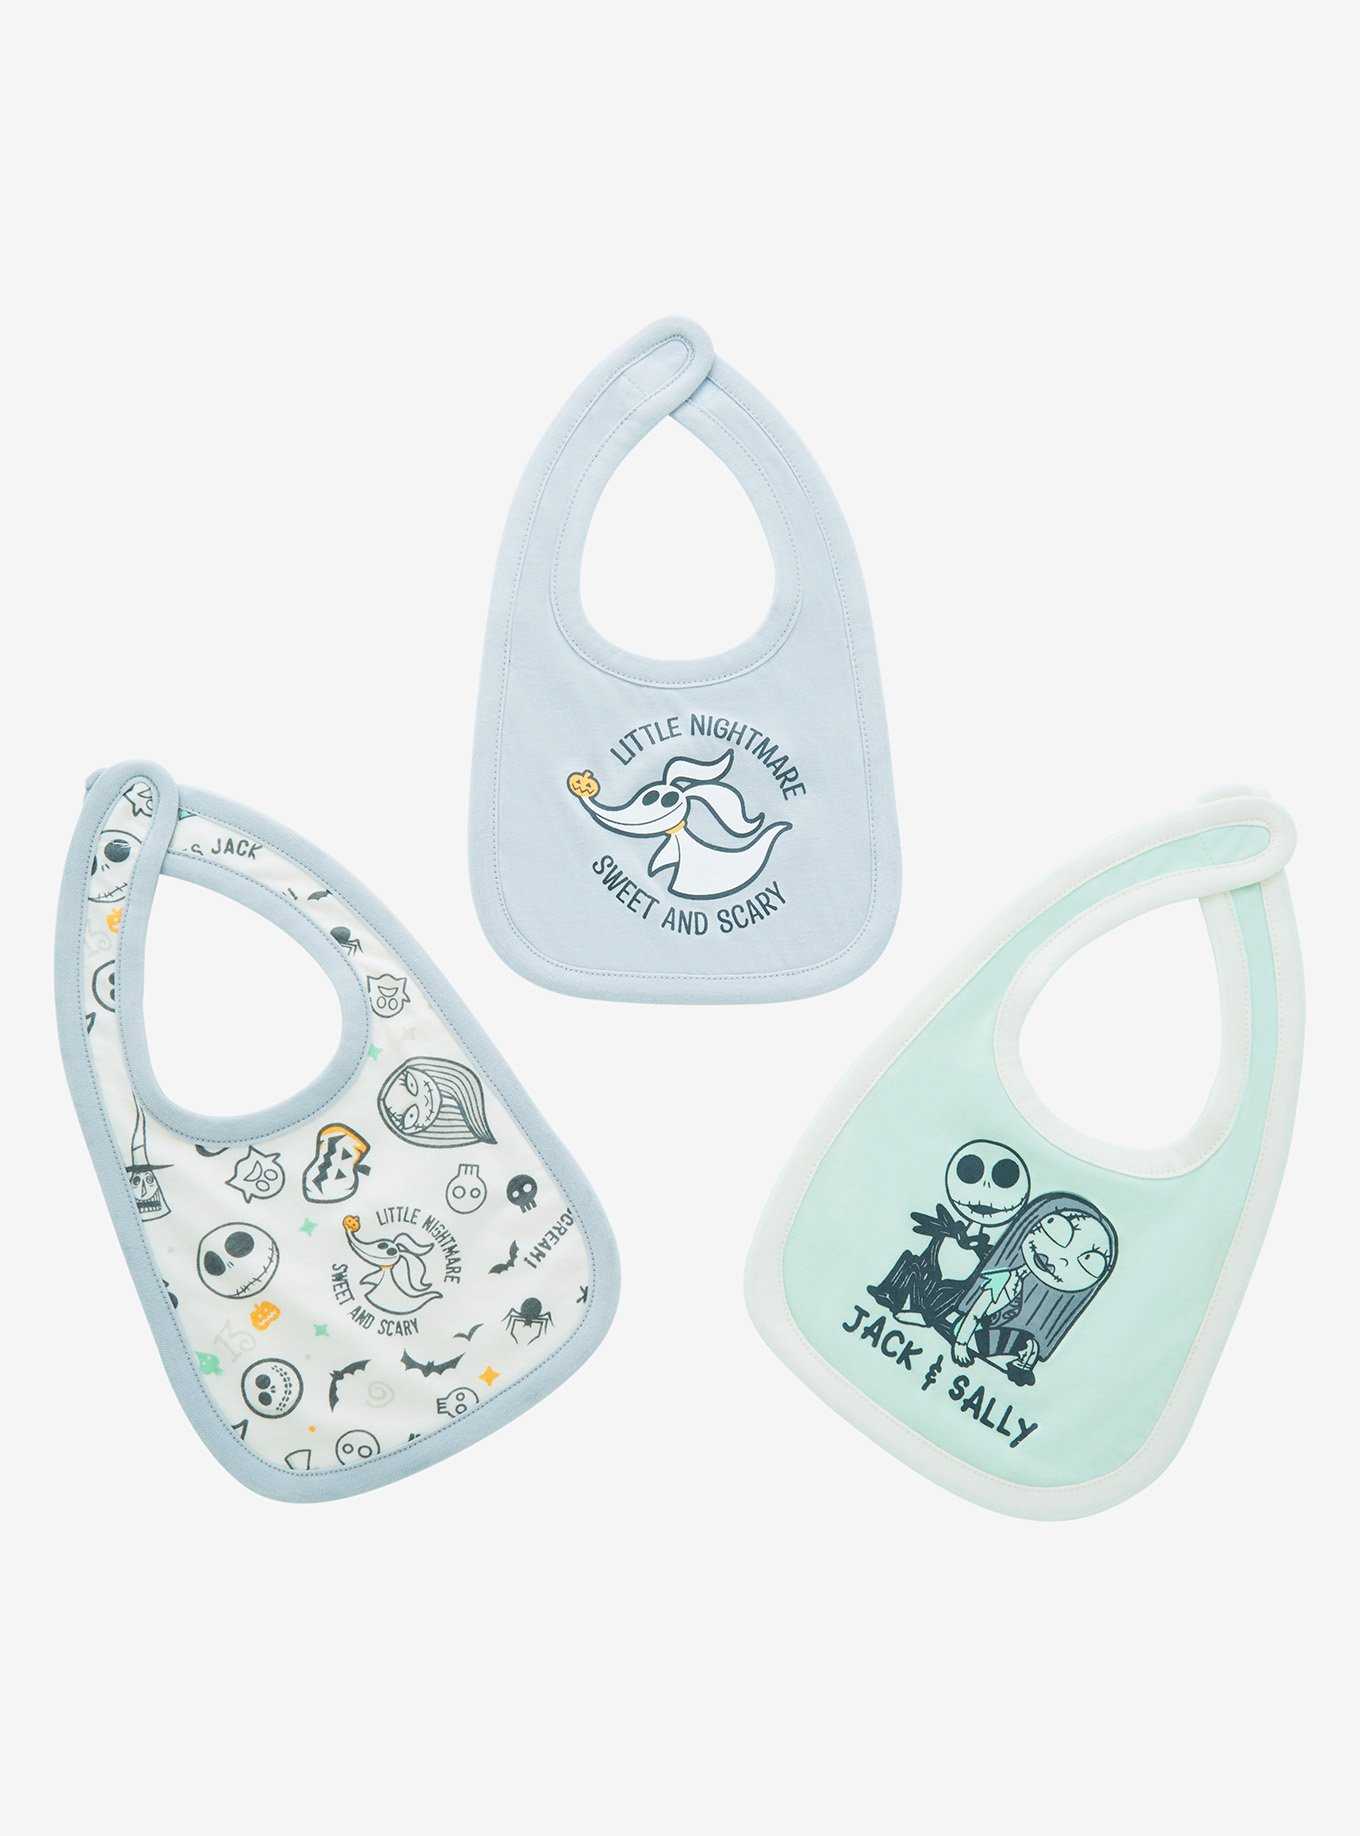 Disney The Nightmare Before Christmas Icons Bib Set - BoxLunch Exclusive, , hi-res